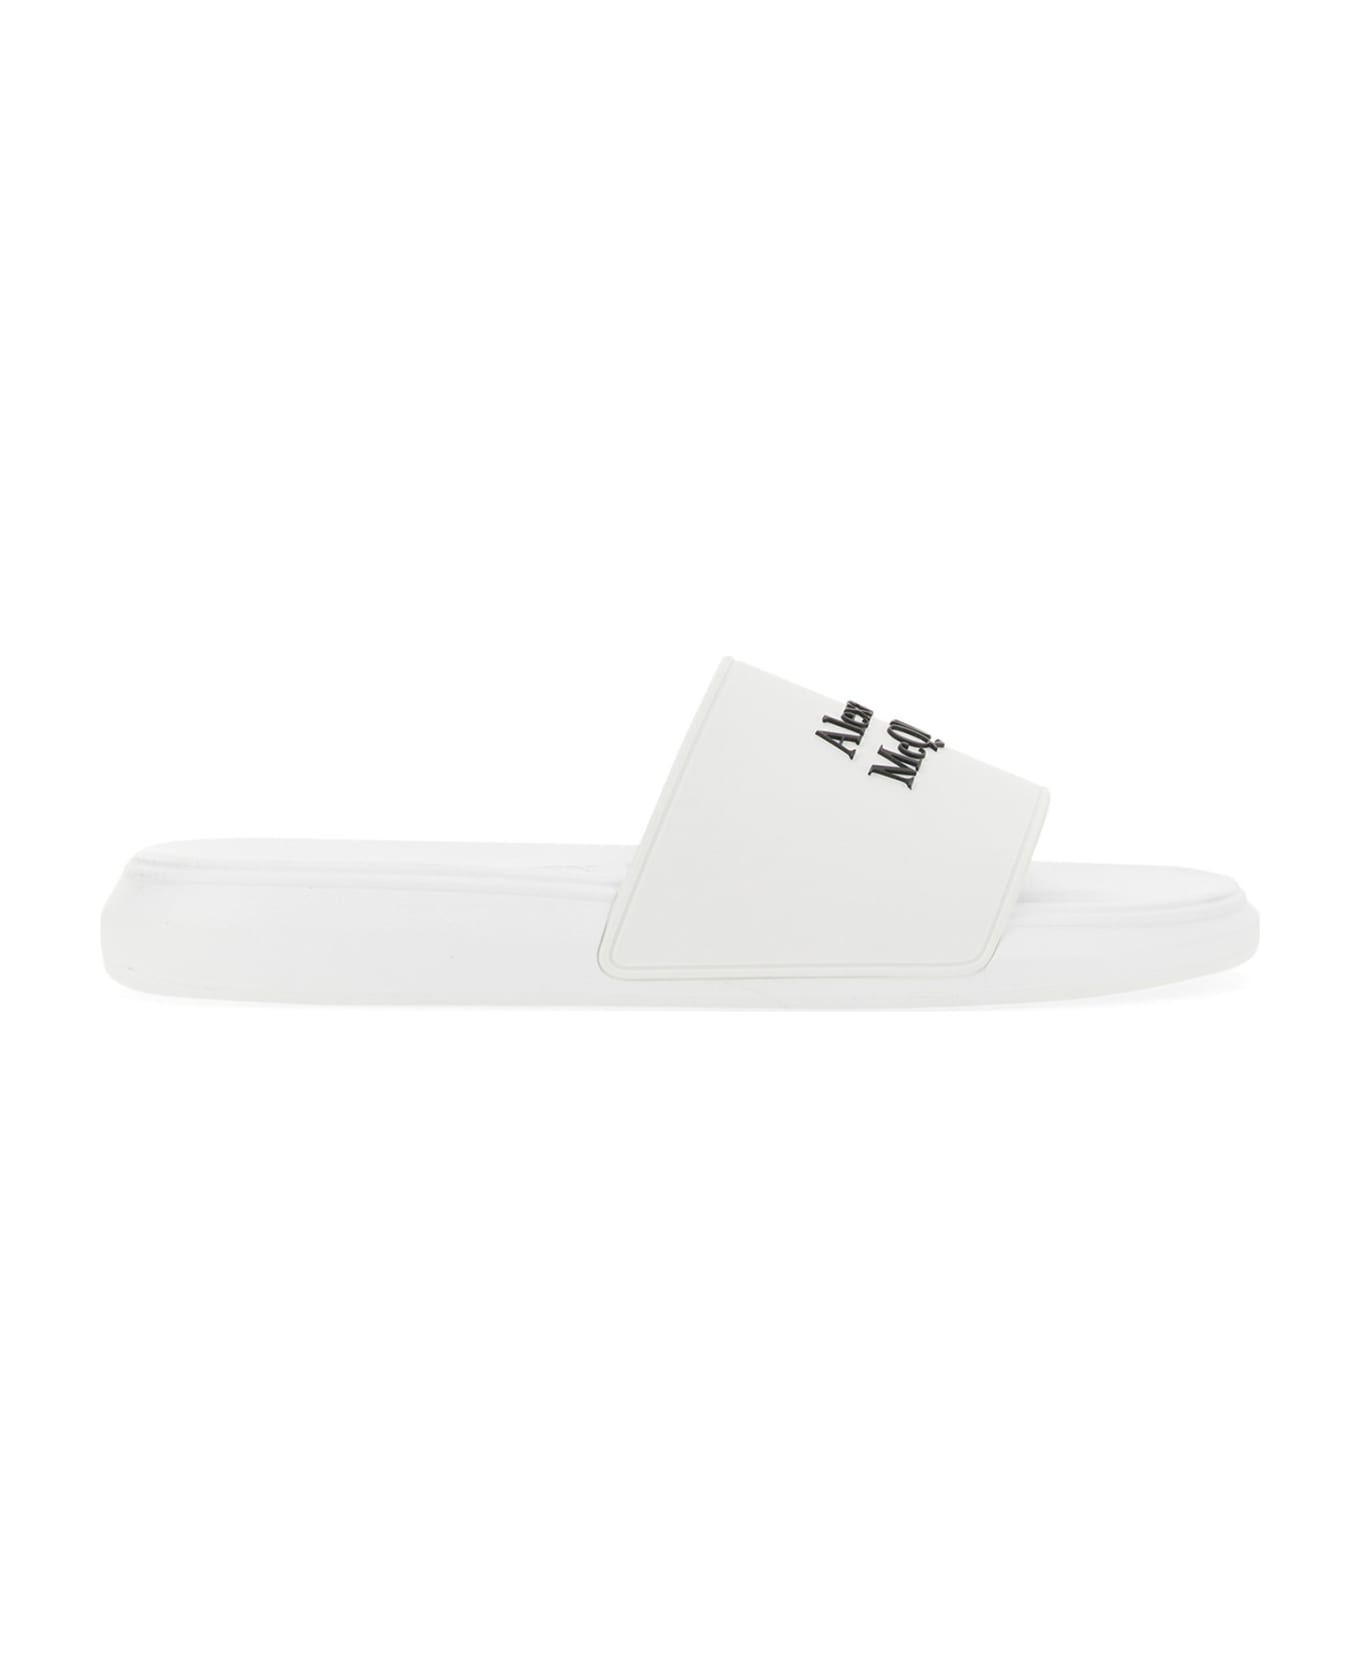 Alexander McQueen Rubber Sandals With Logo - White その他各種シューズ